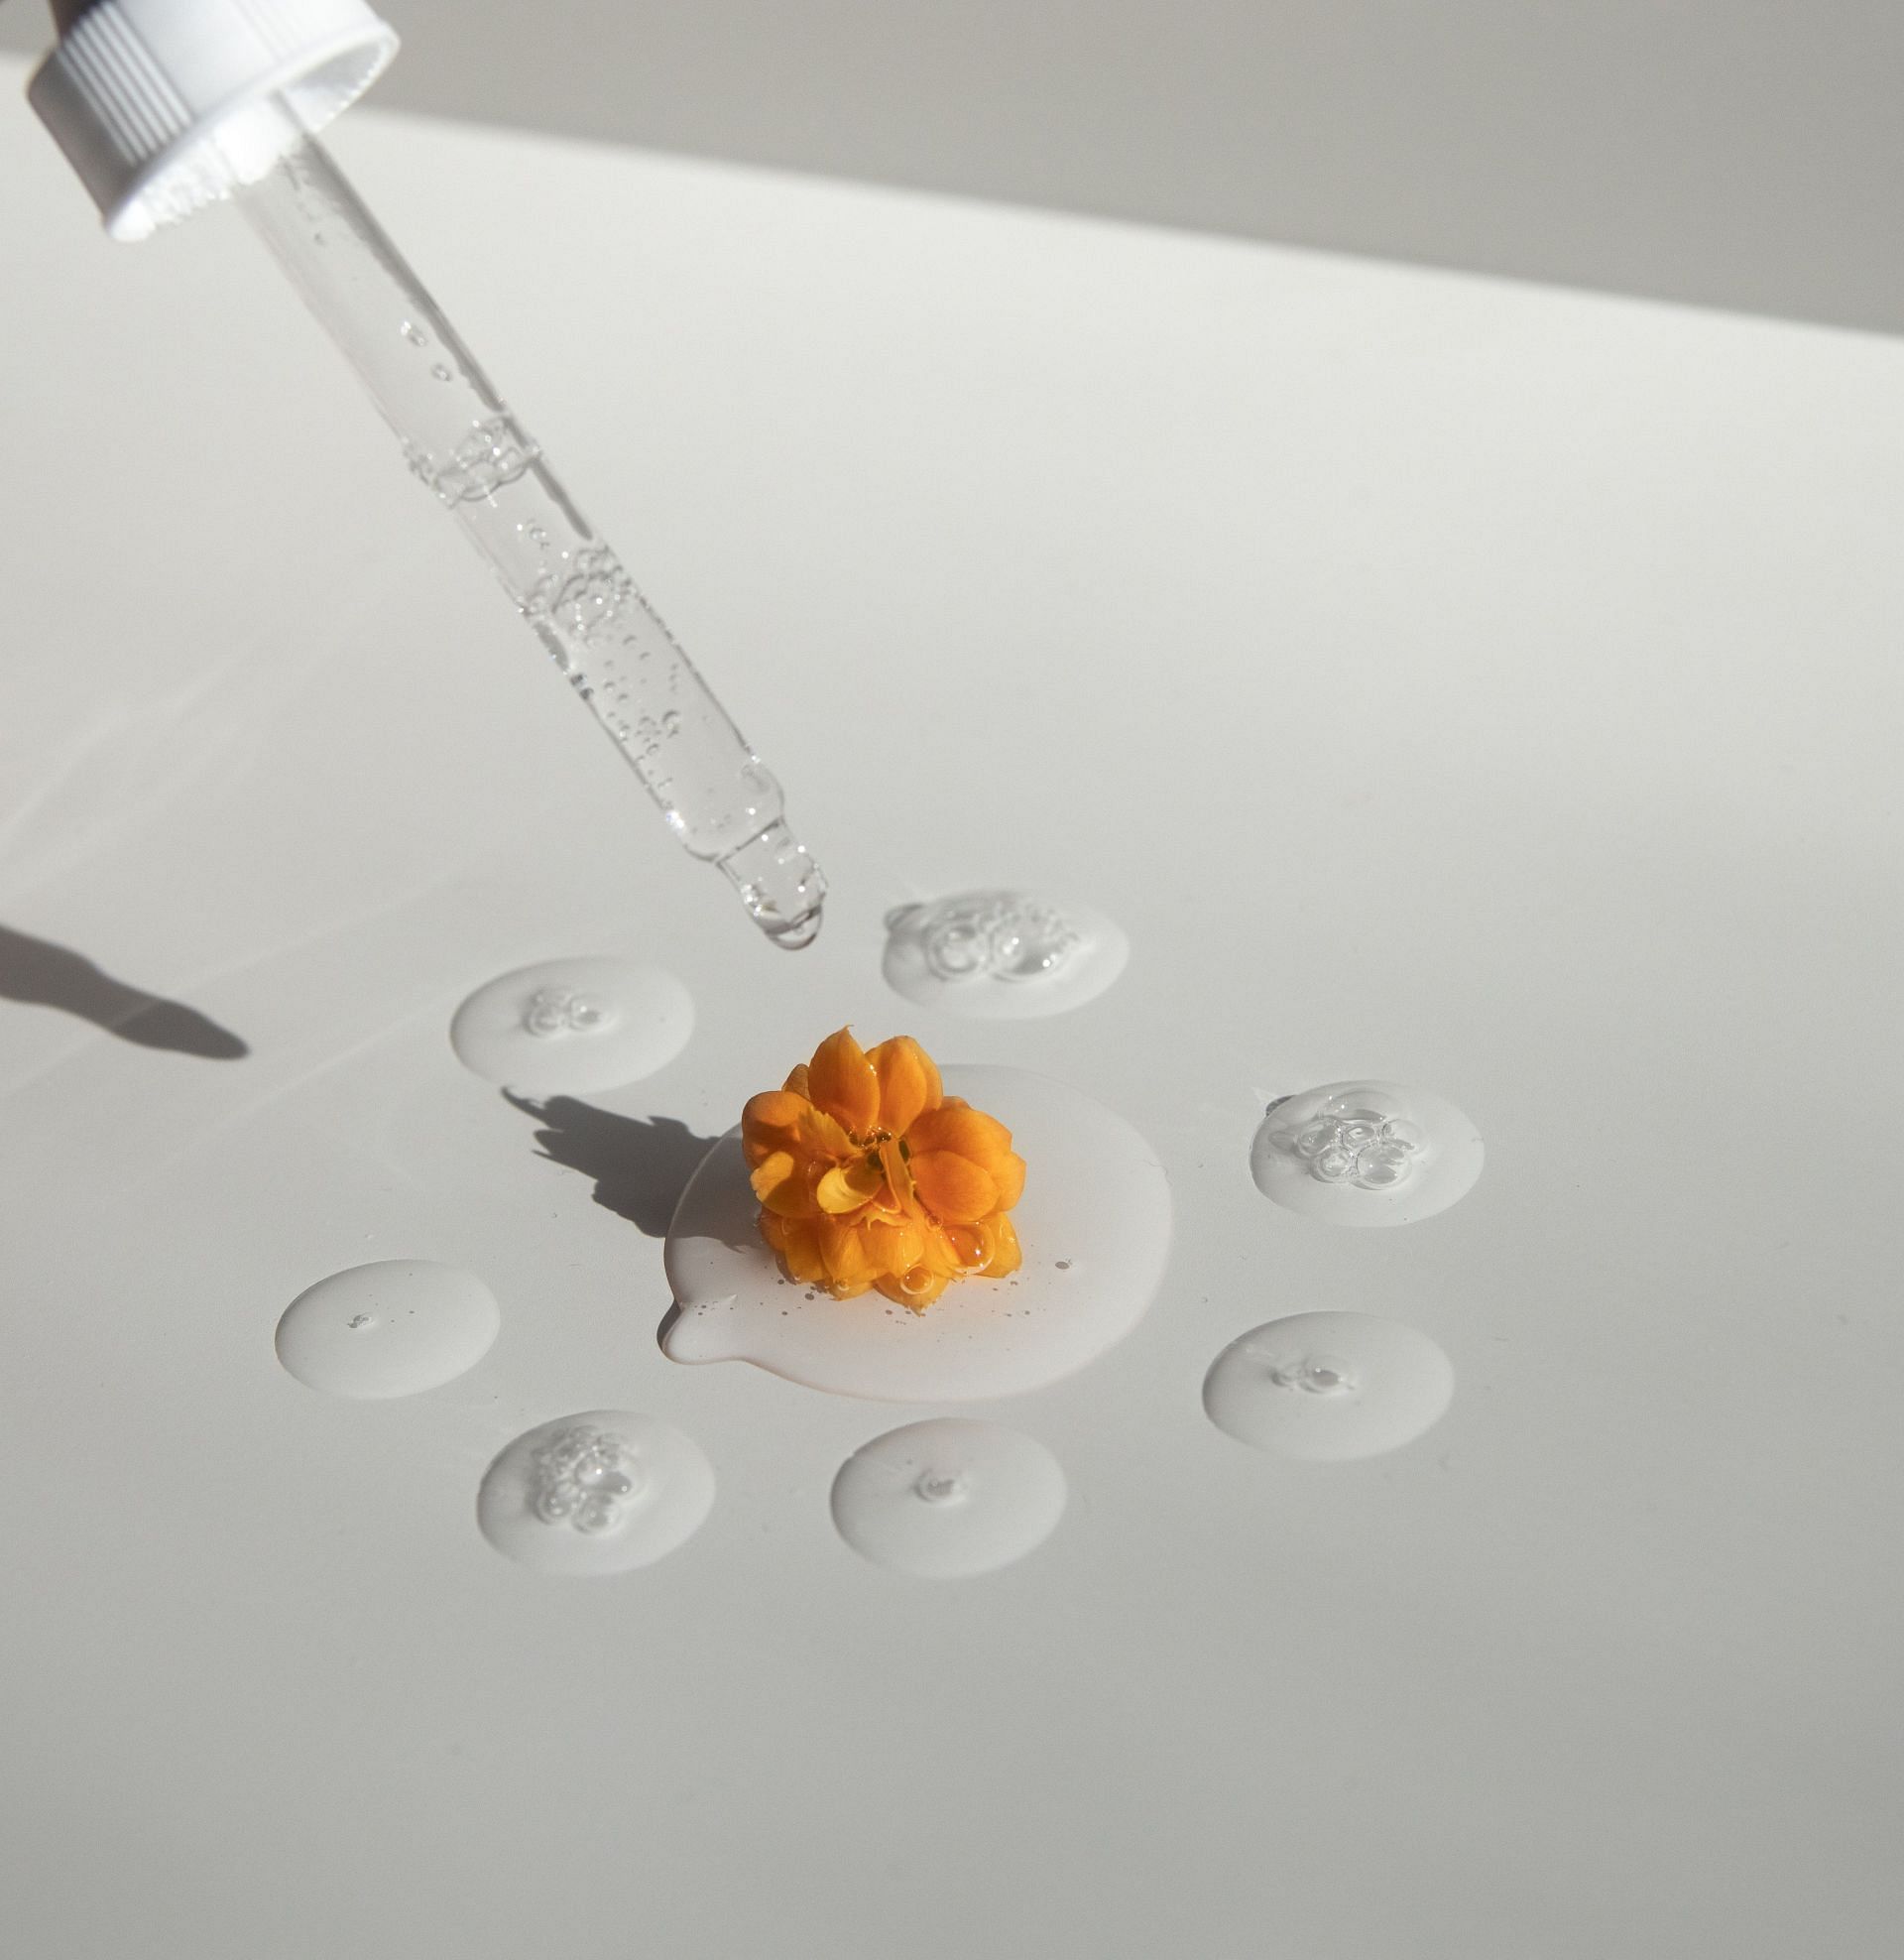 Calendula gel is a natural topical ointment for skin irritation.(Image Via Pexels)